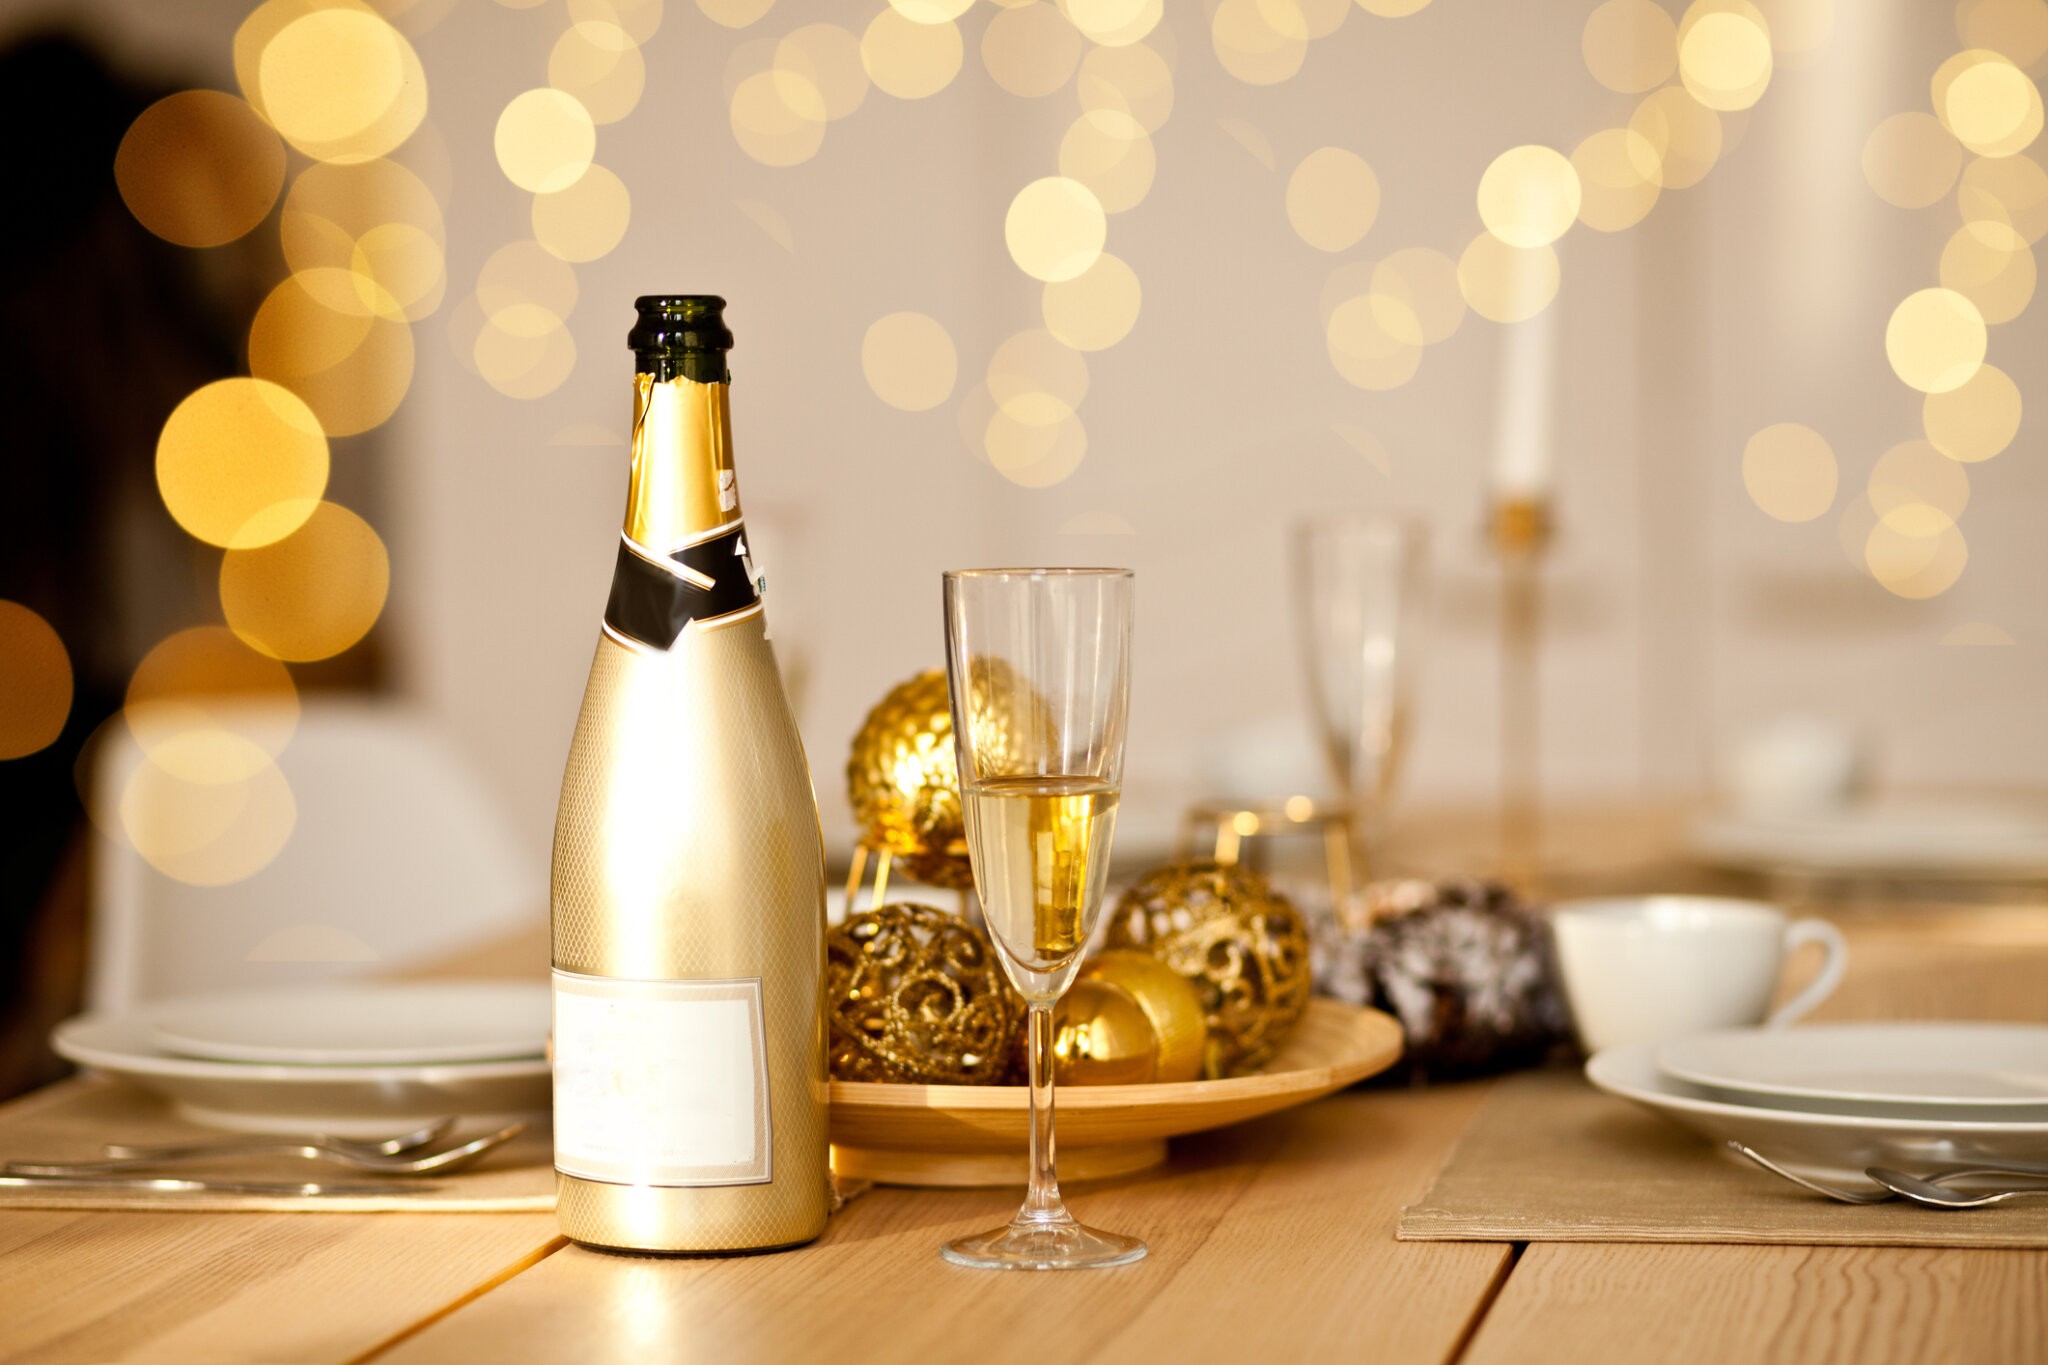 Christmas table setting with holiday decorations in a gold color. New Year celebration. A bottle and glass of champagne